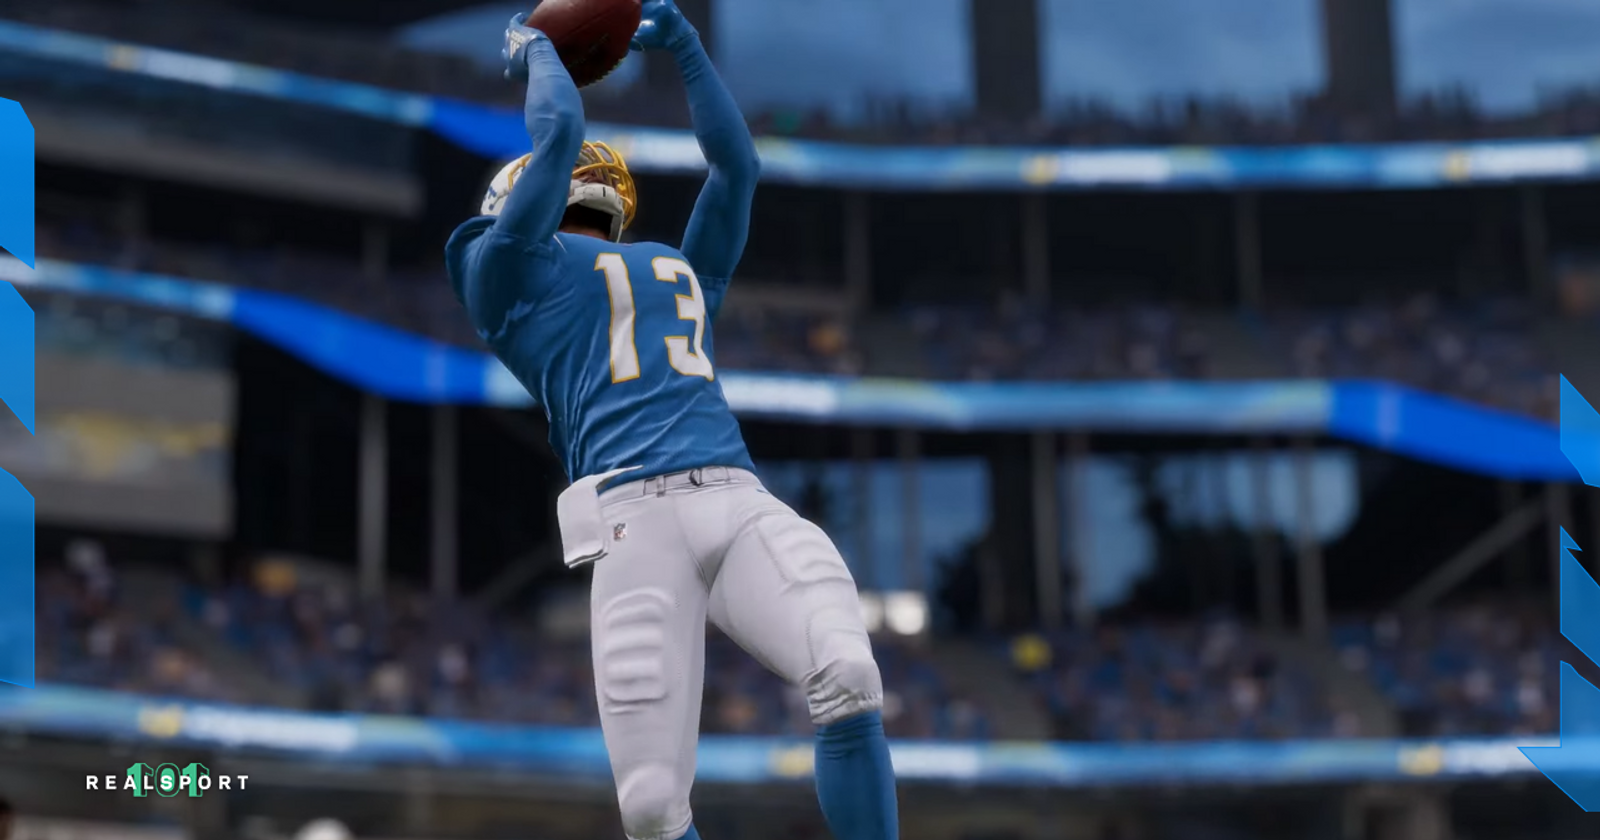 madden 22 ps5 free